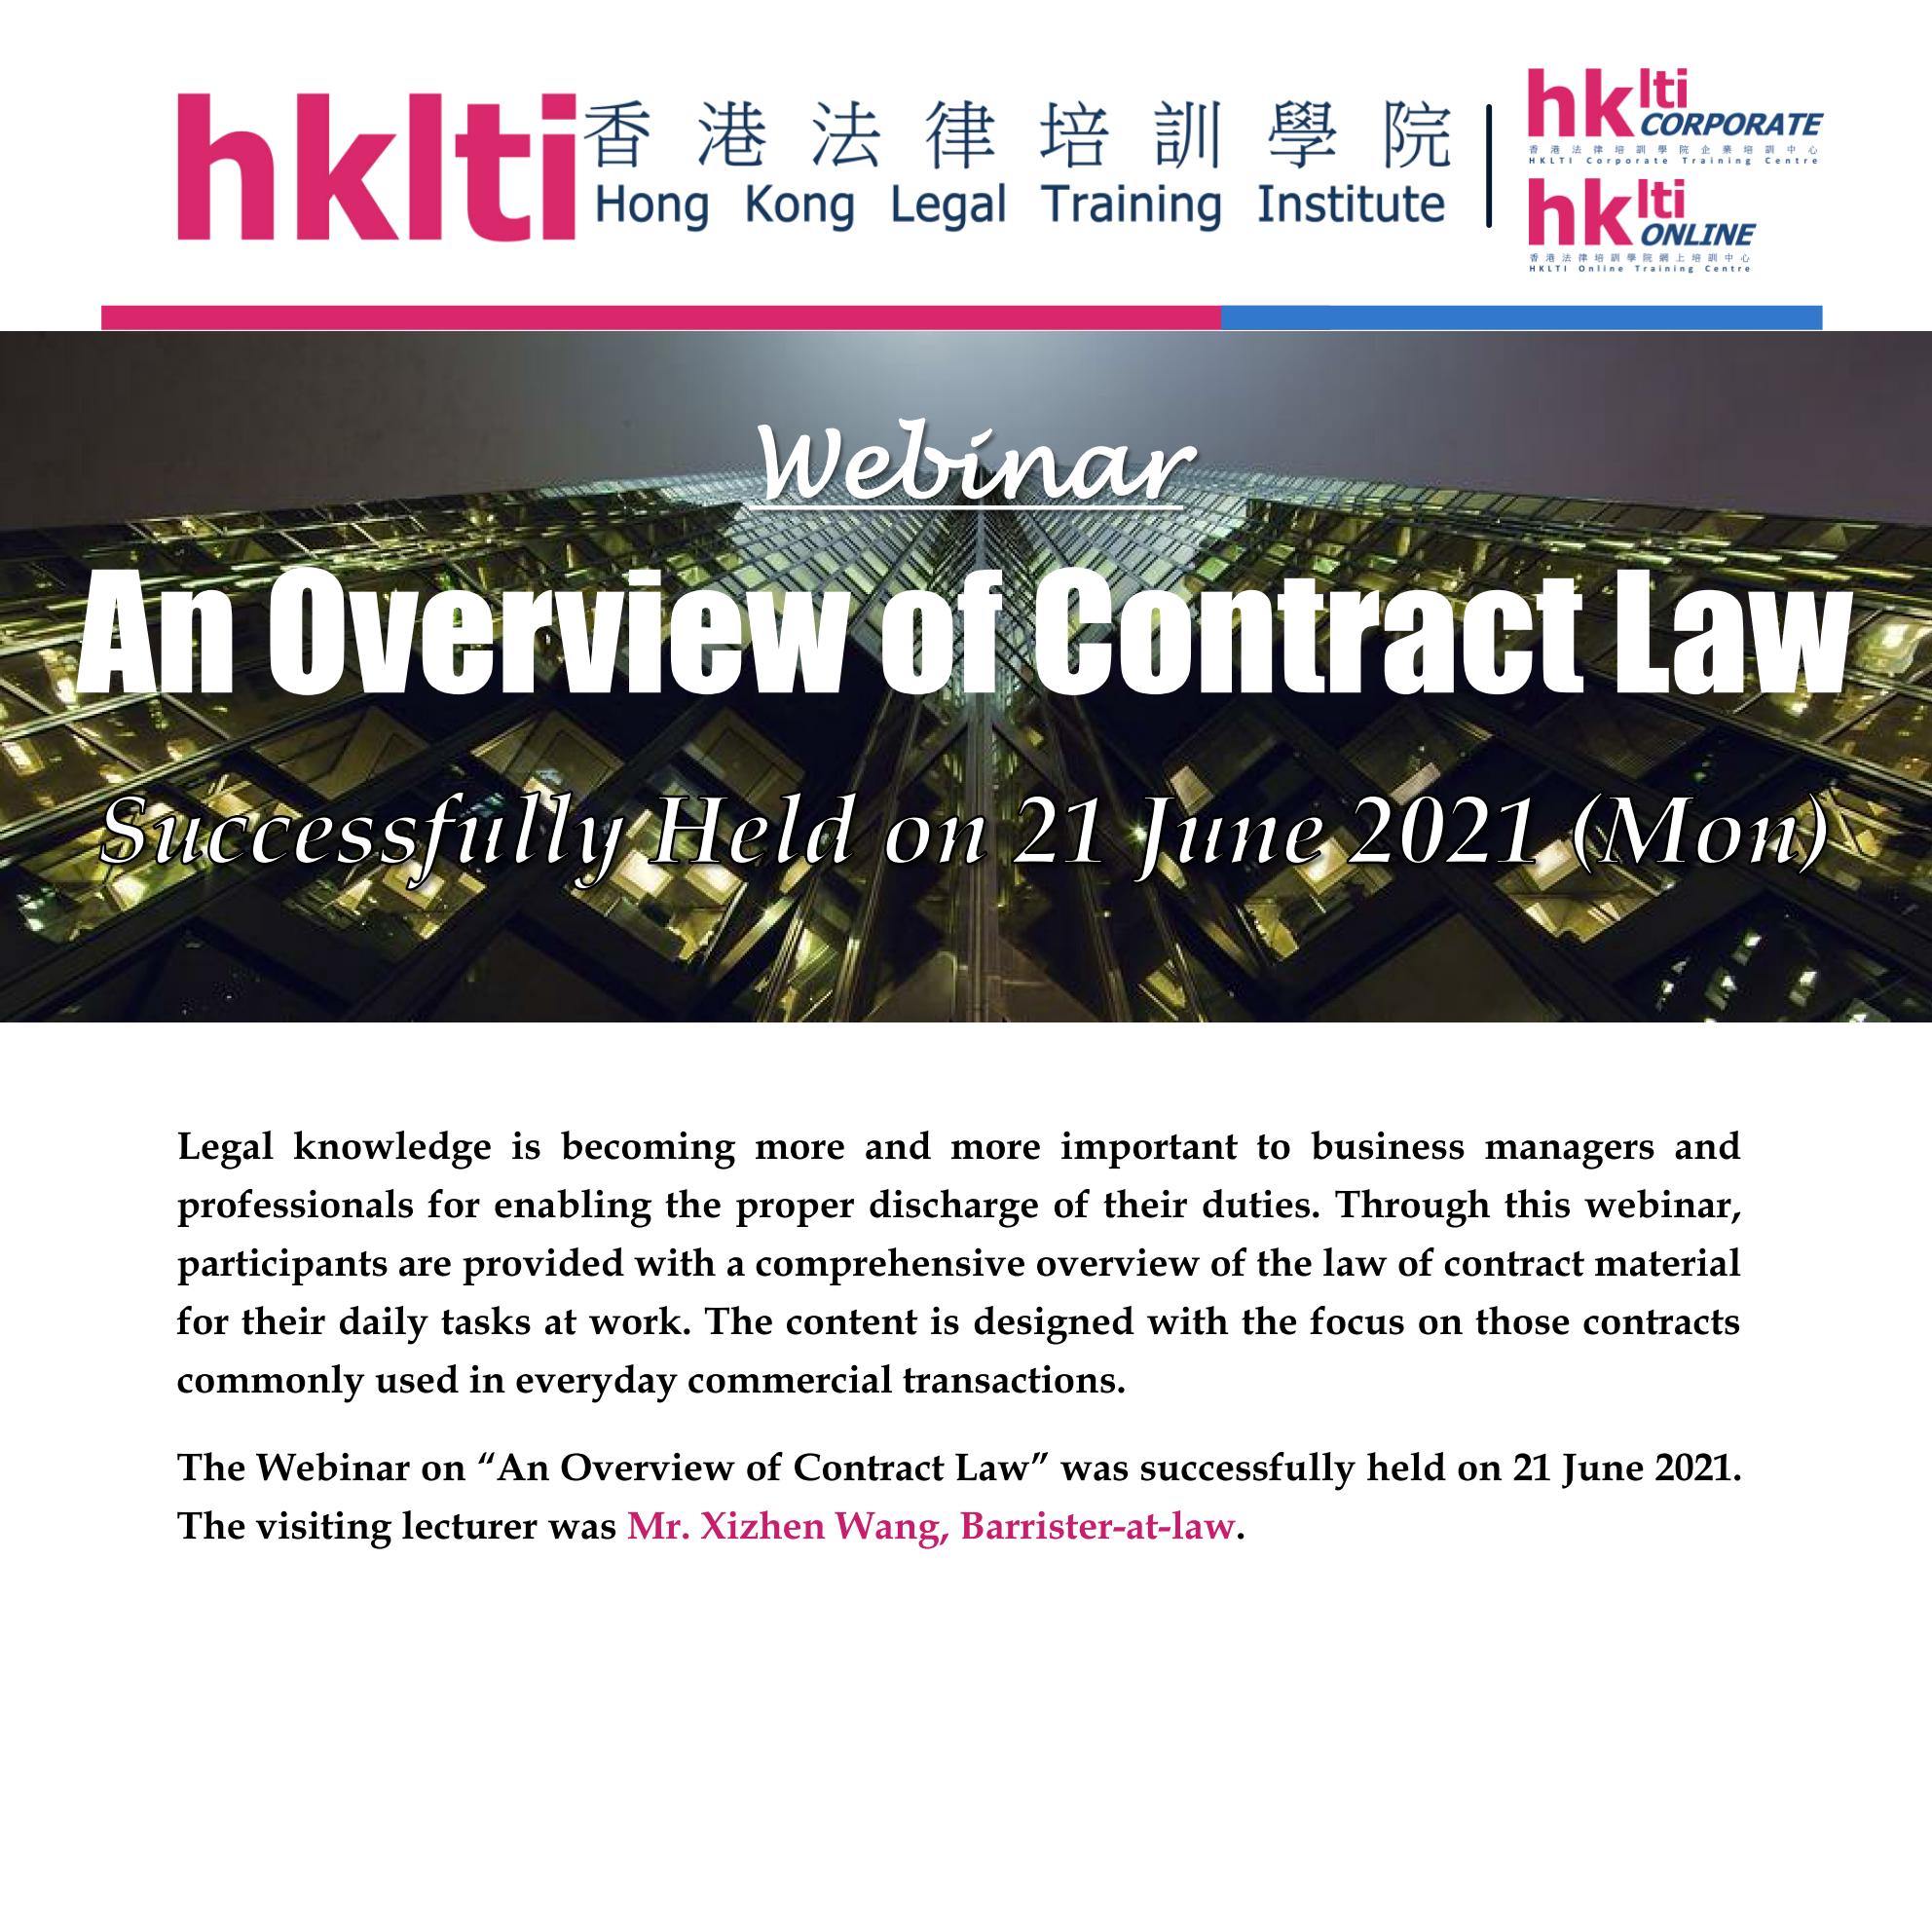 hklti free webinar an overview of contract law seminar report 20210621